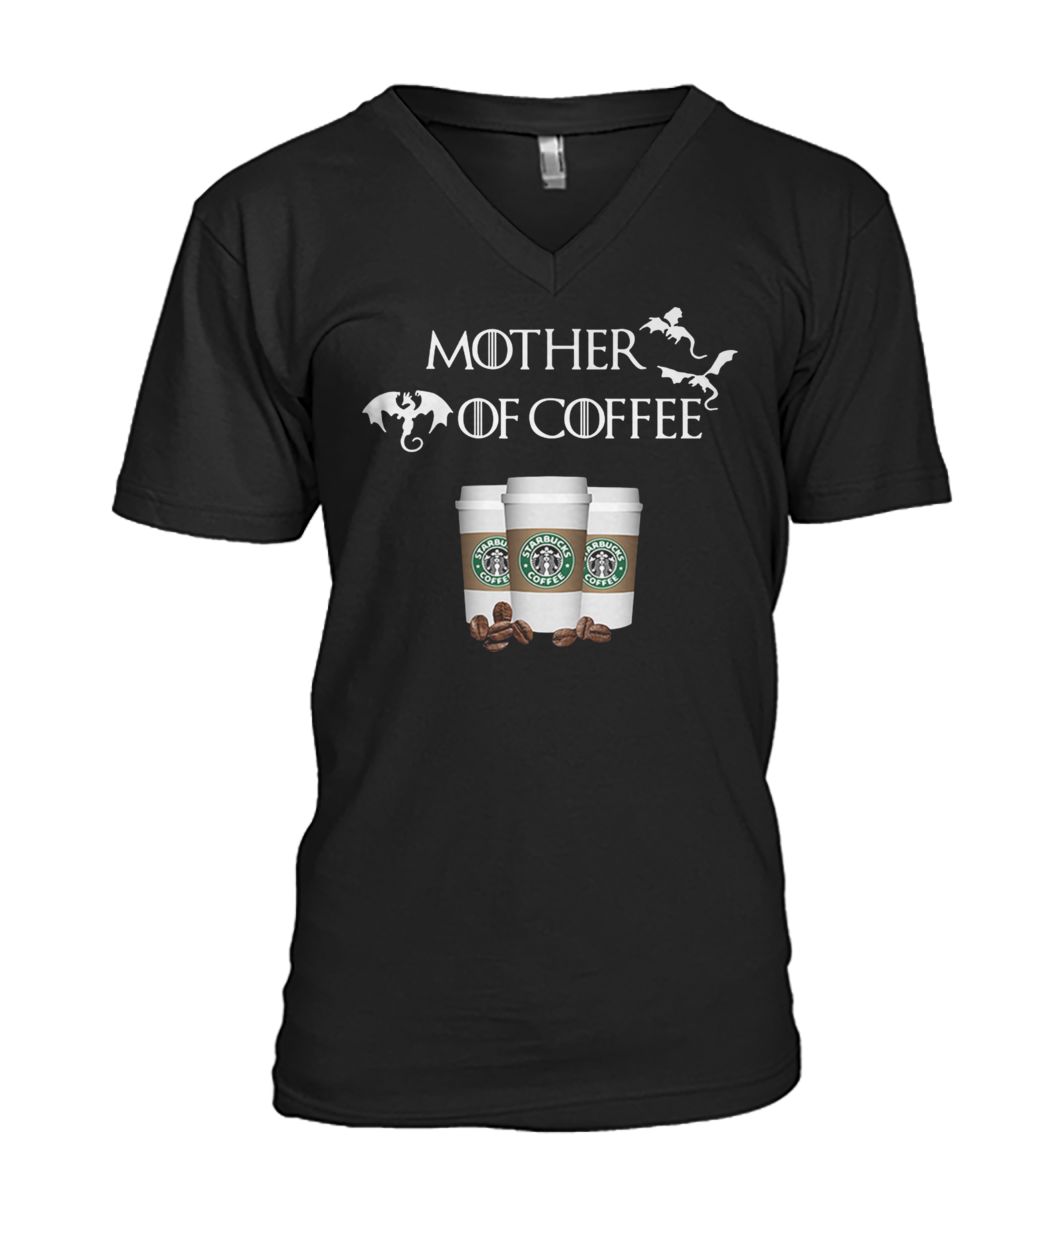 Starbucks mother of coffee game of thrones mens v-neck